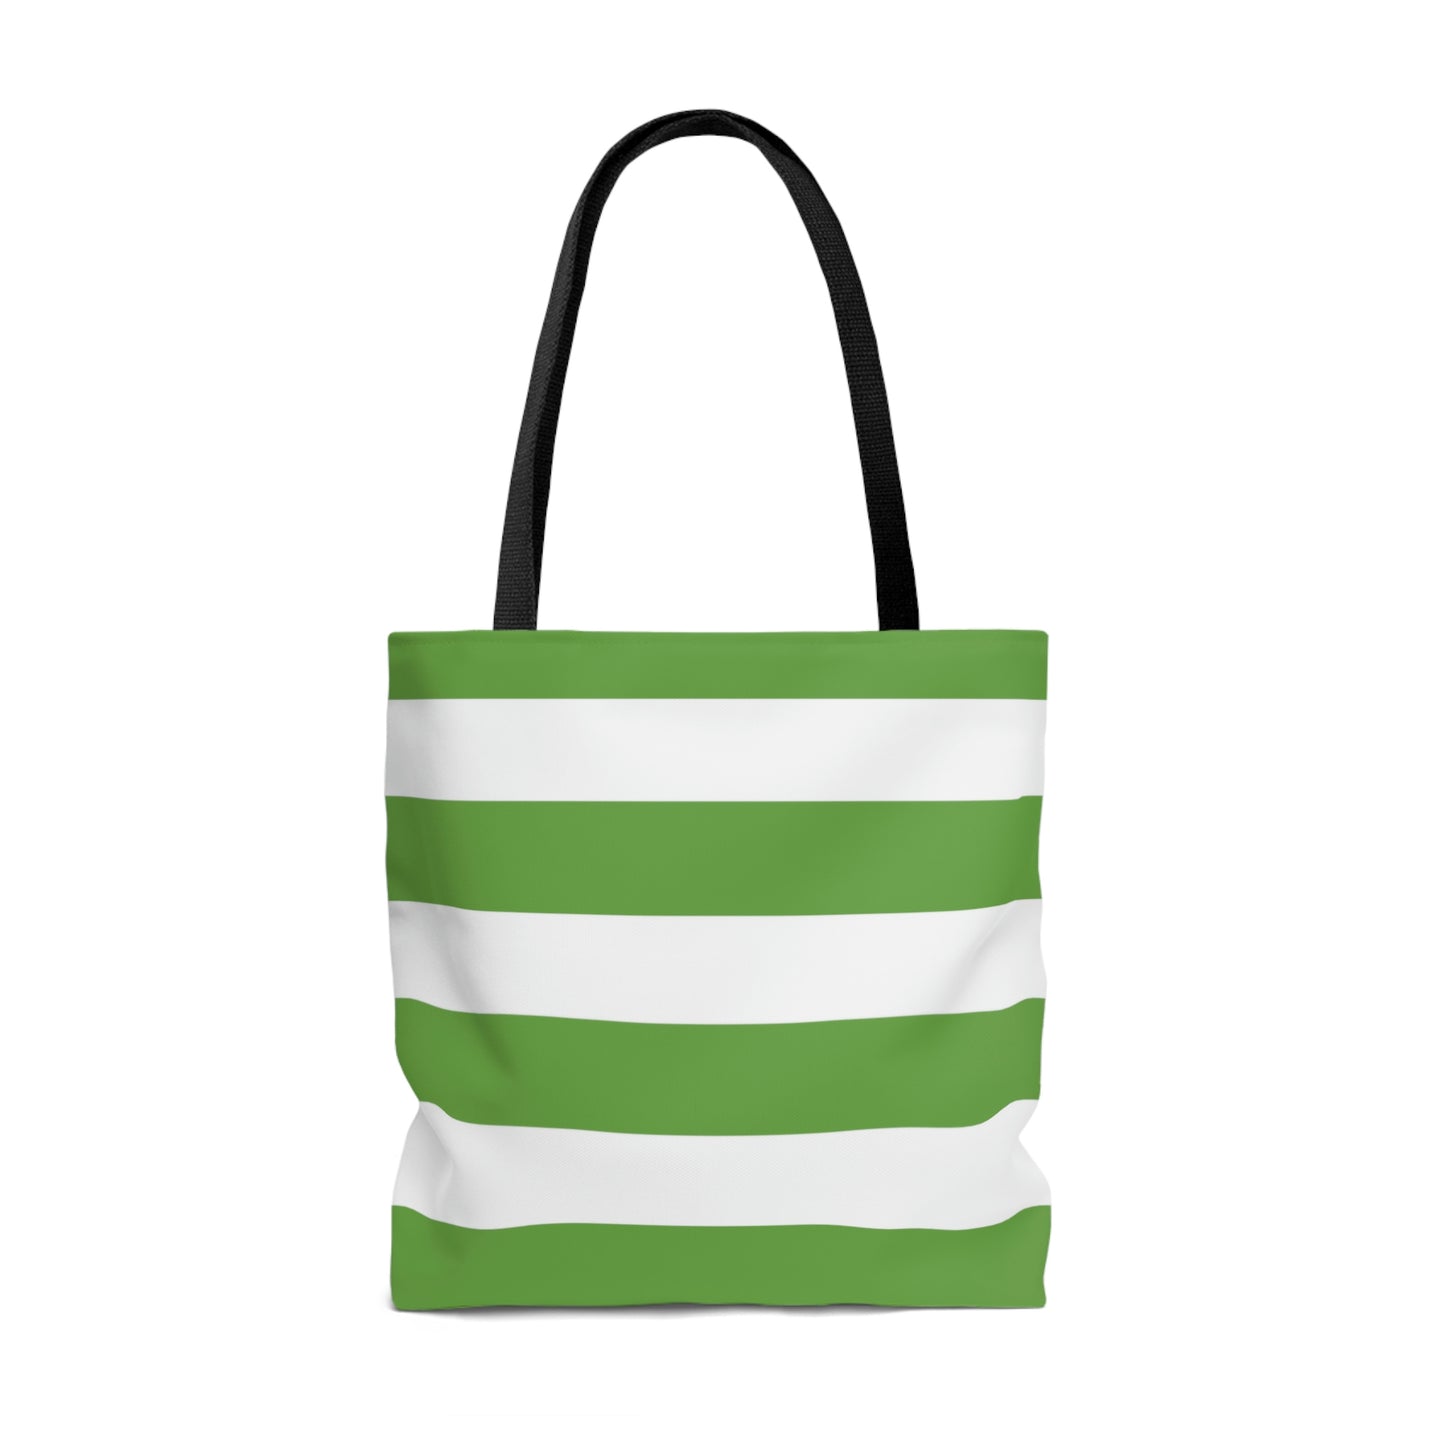 Lightweight Tote Bag - Lime Green/White Stripes